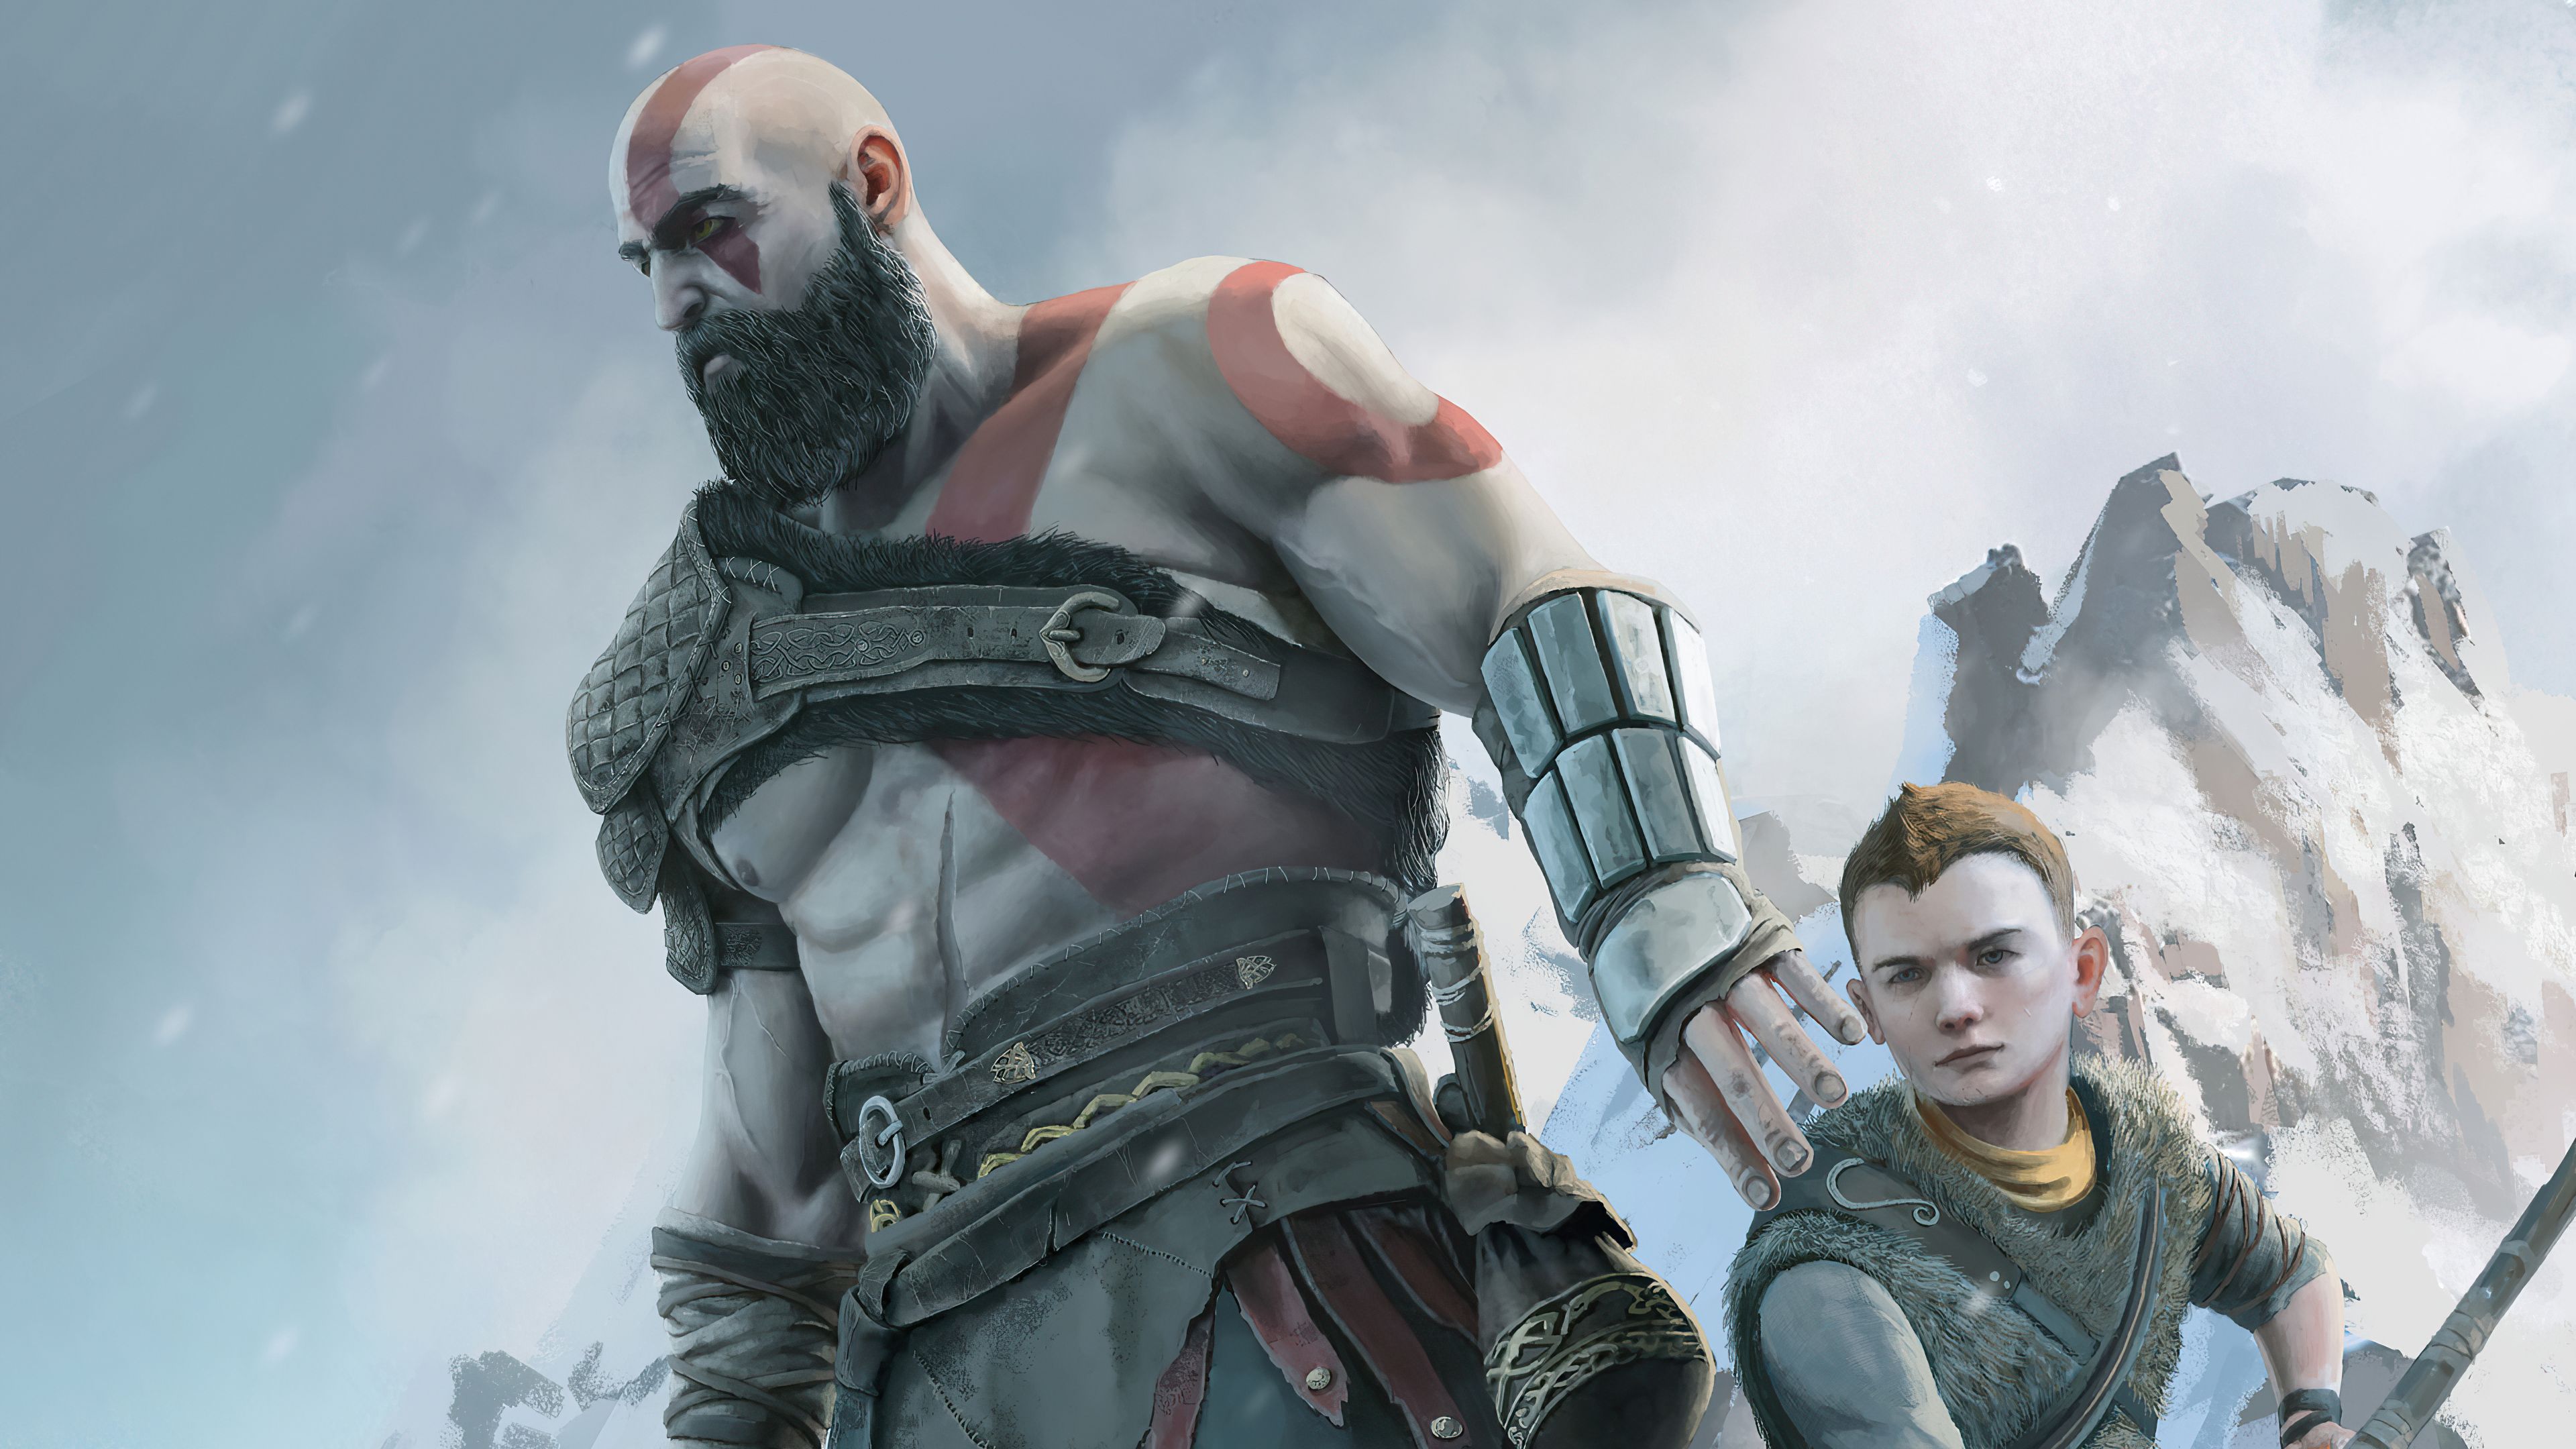 Kratos and Atreus from God of war Wallpapers 4k Ultra HD ID:6097.